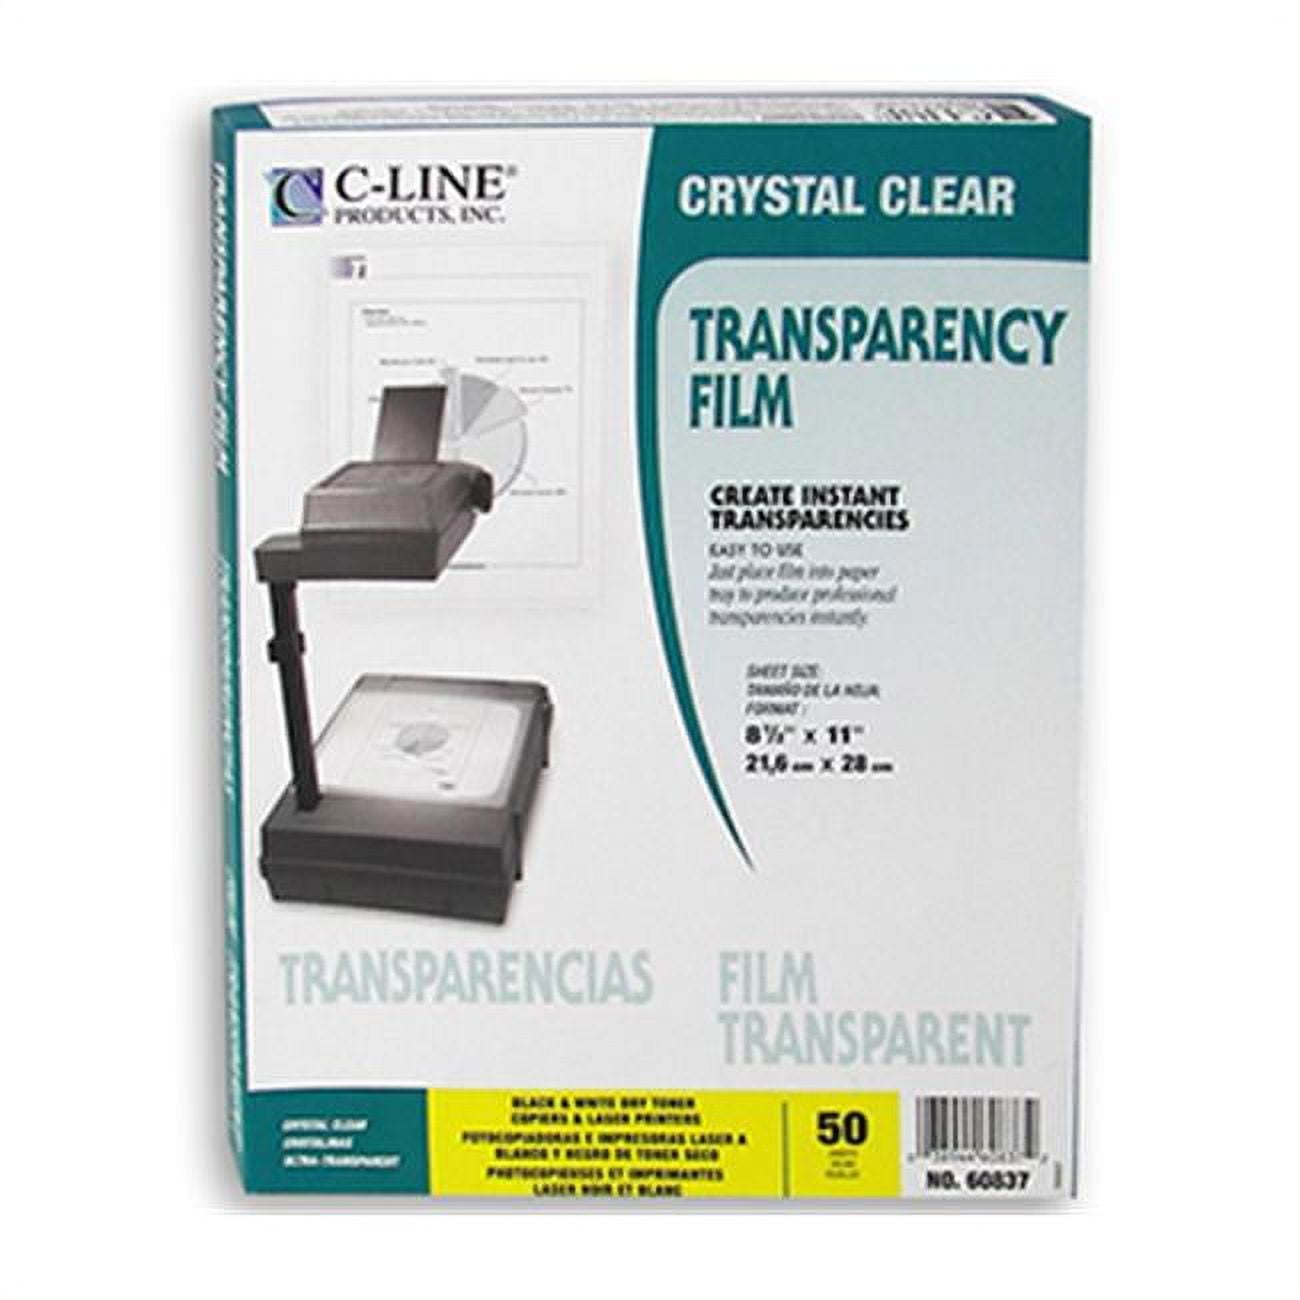 Transparency Films (28 products) find prices here »